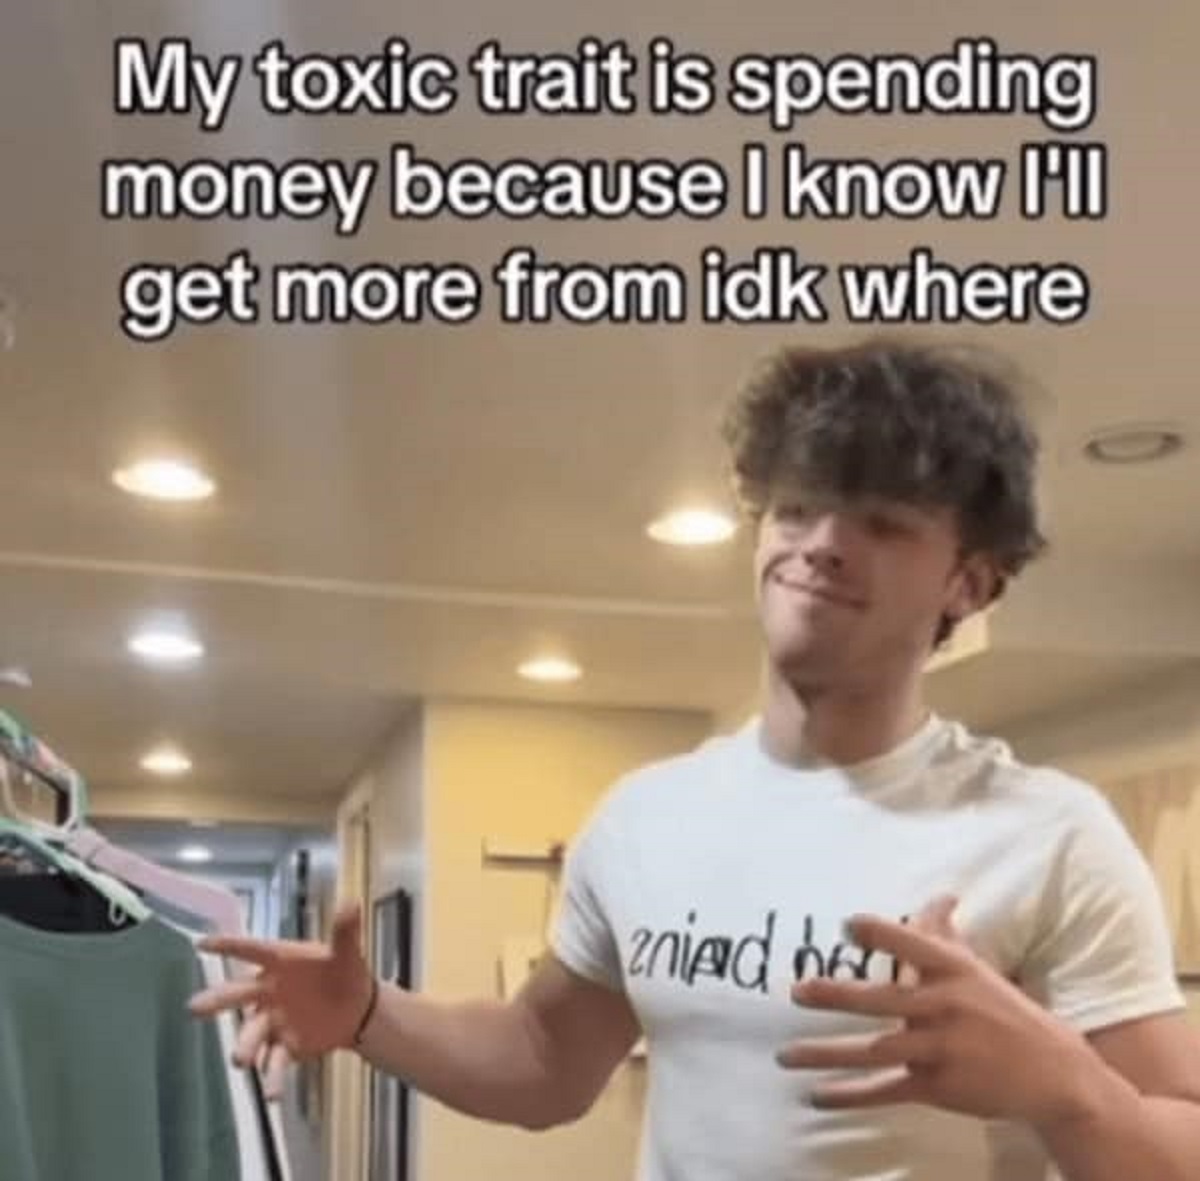 photo caption - My toxic trait is spending money because I know I'll get more from idk where nied he